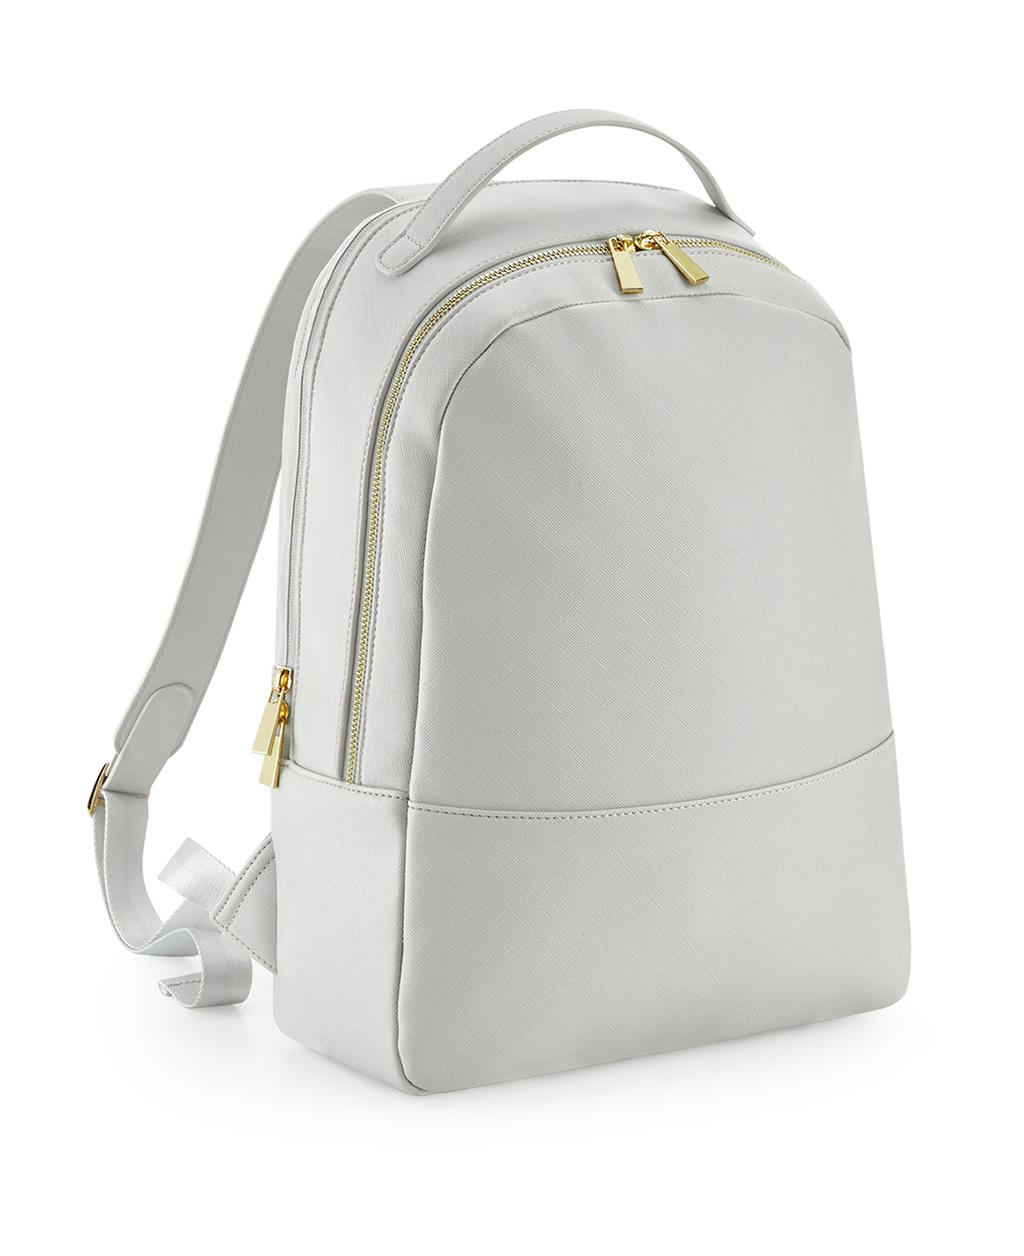  Boutique Backpack in Farbe Soft Grey